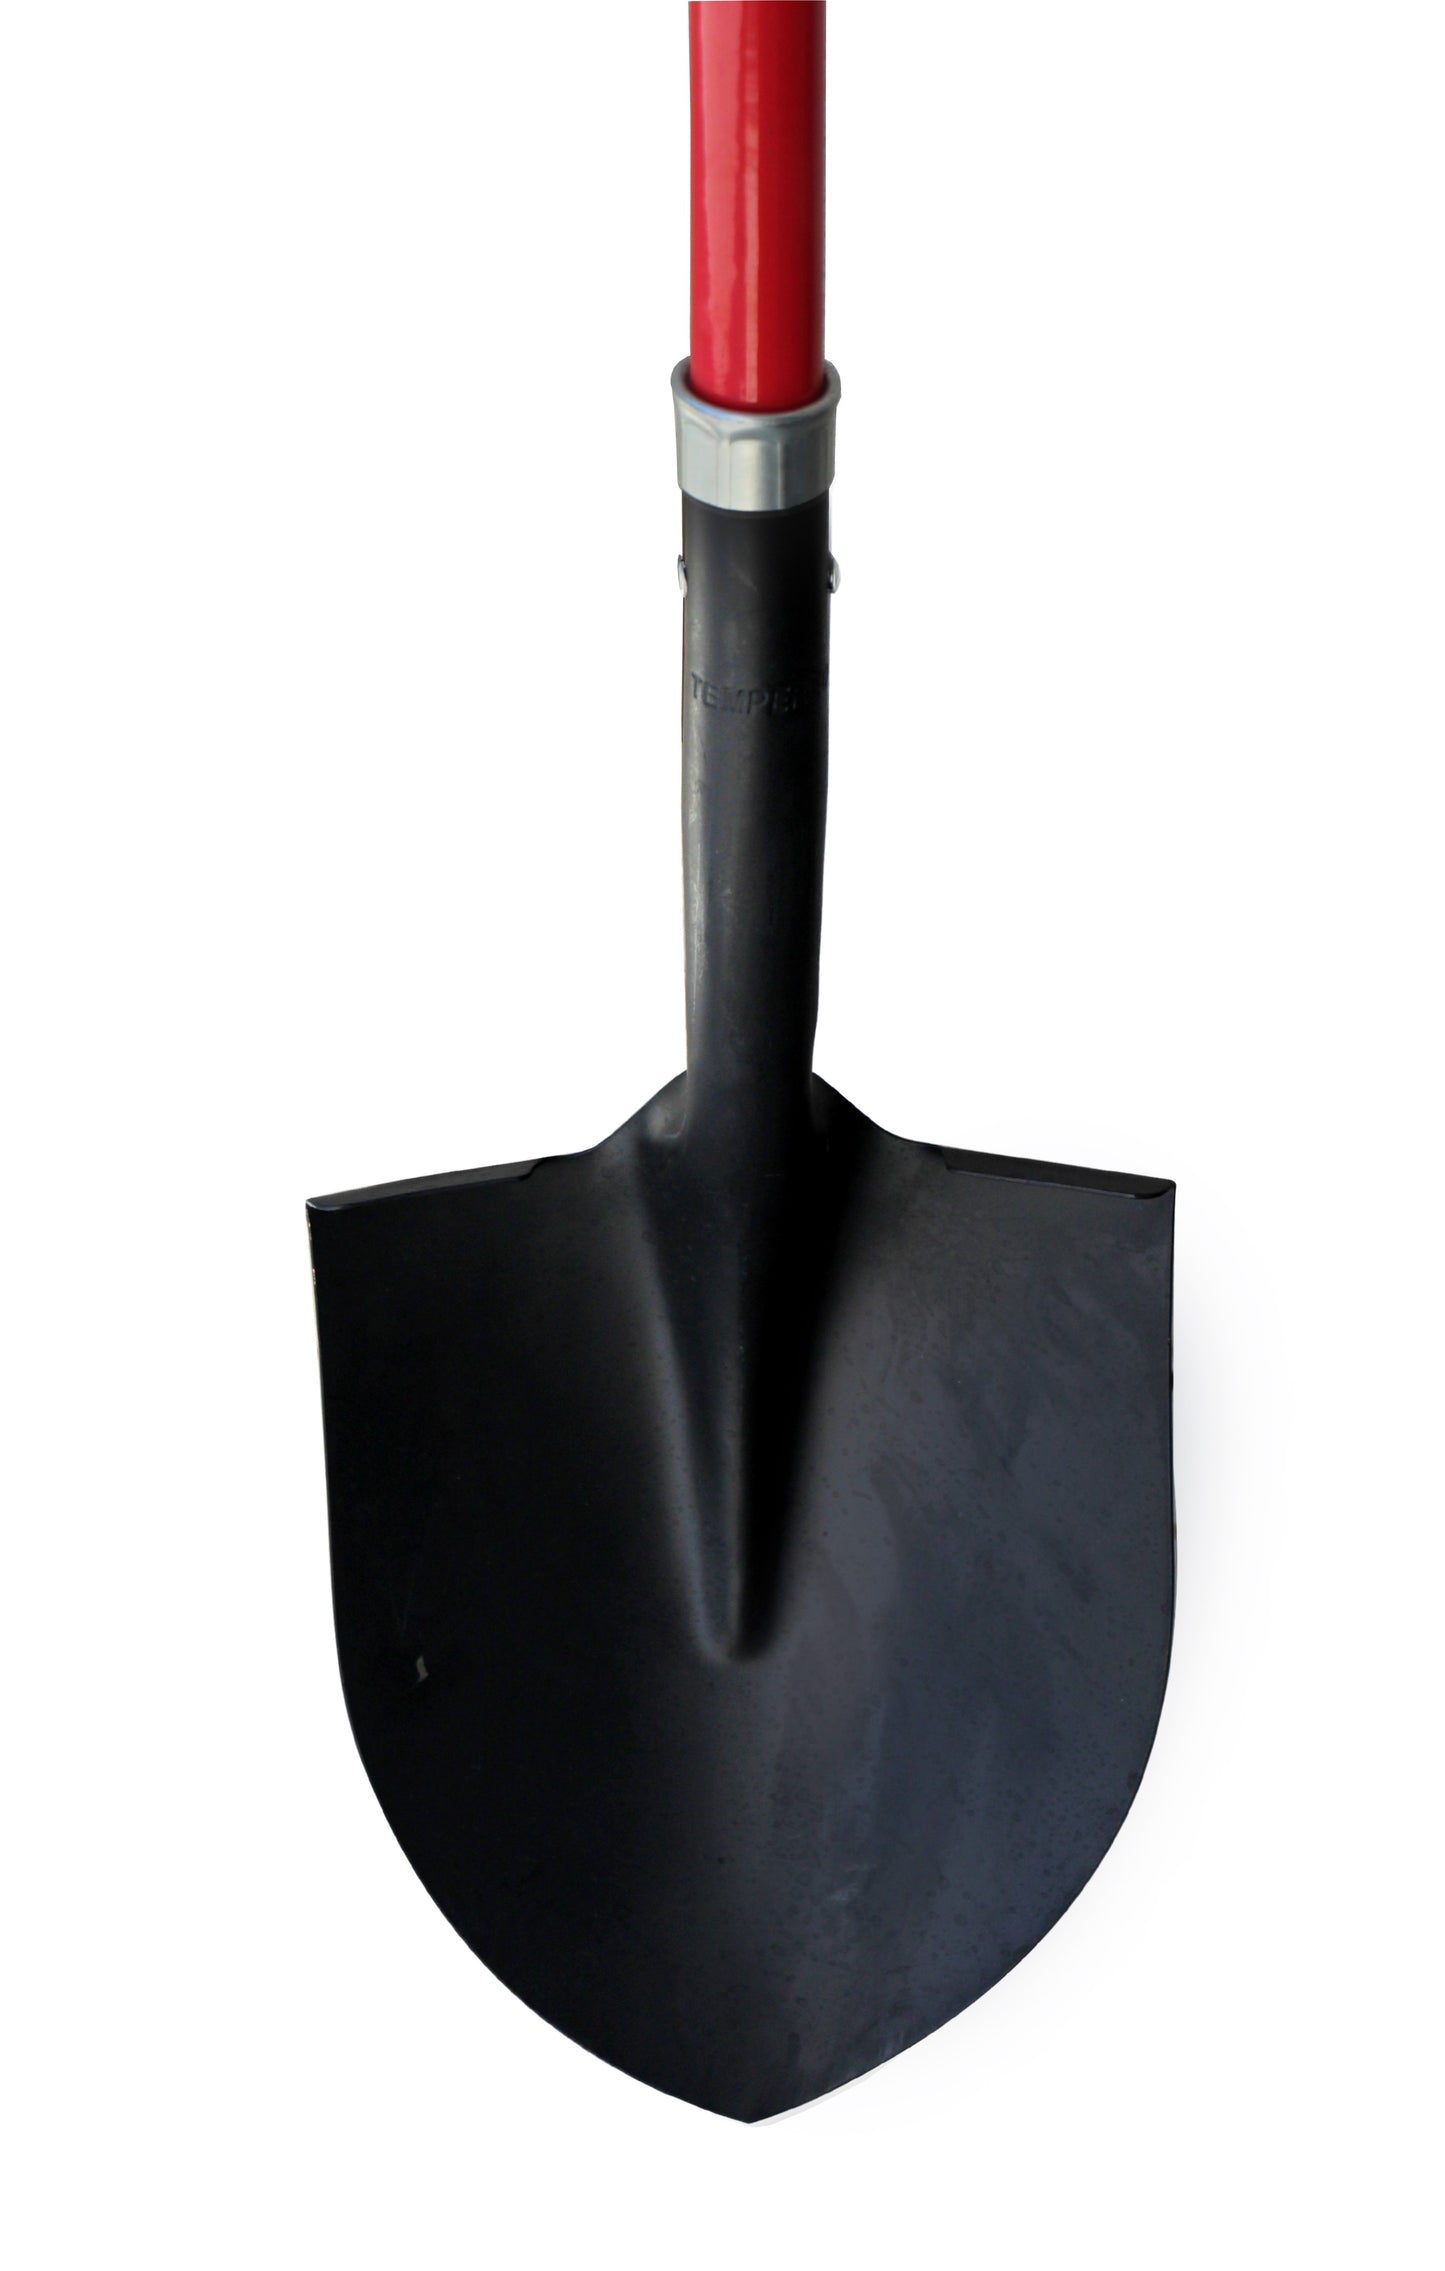 TABOR TOOLS J201 Digging Shovel With Rounded Blade and Comfortable D-Grip 31" Fiberglass Handle